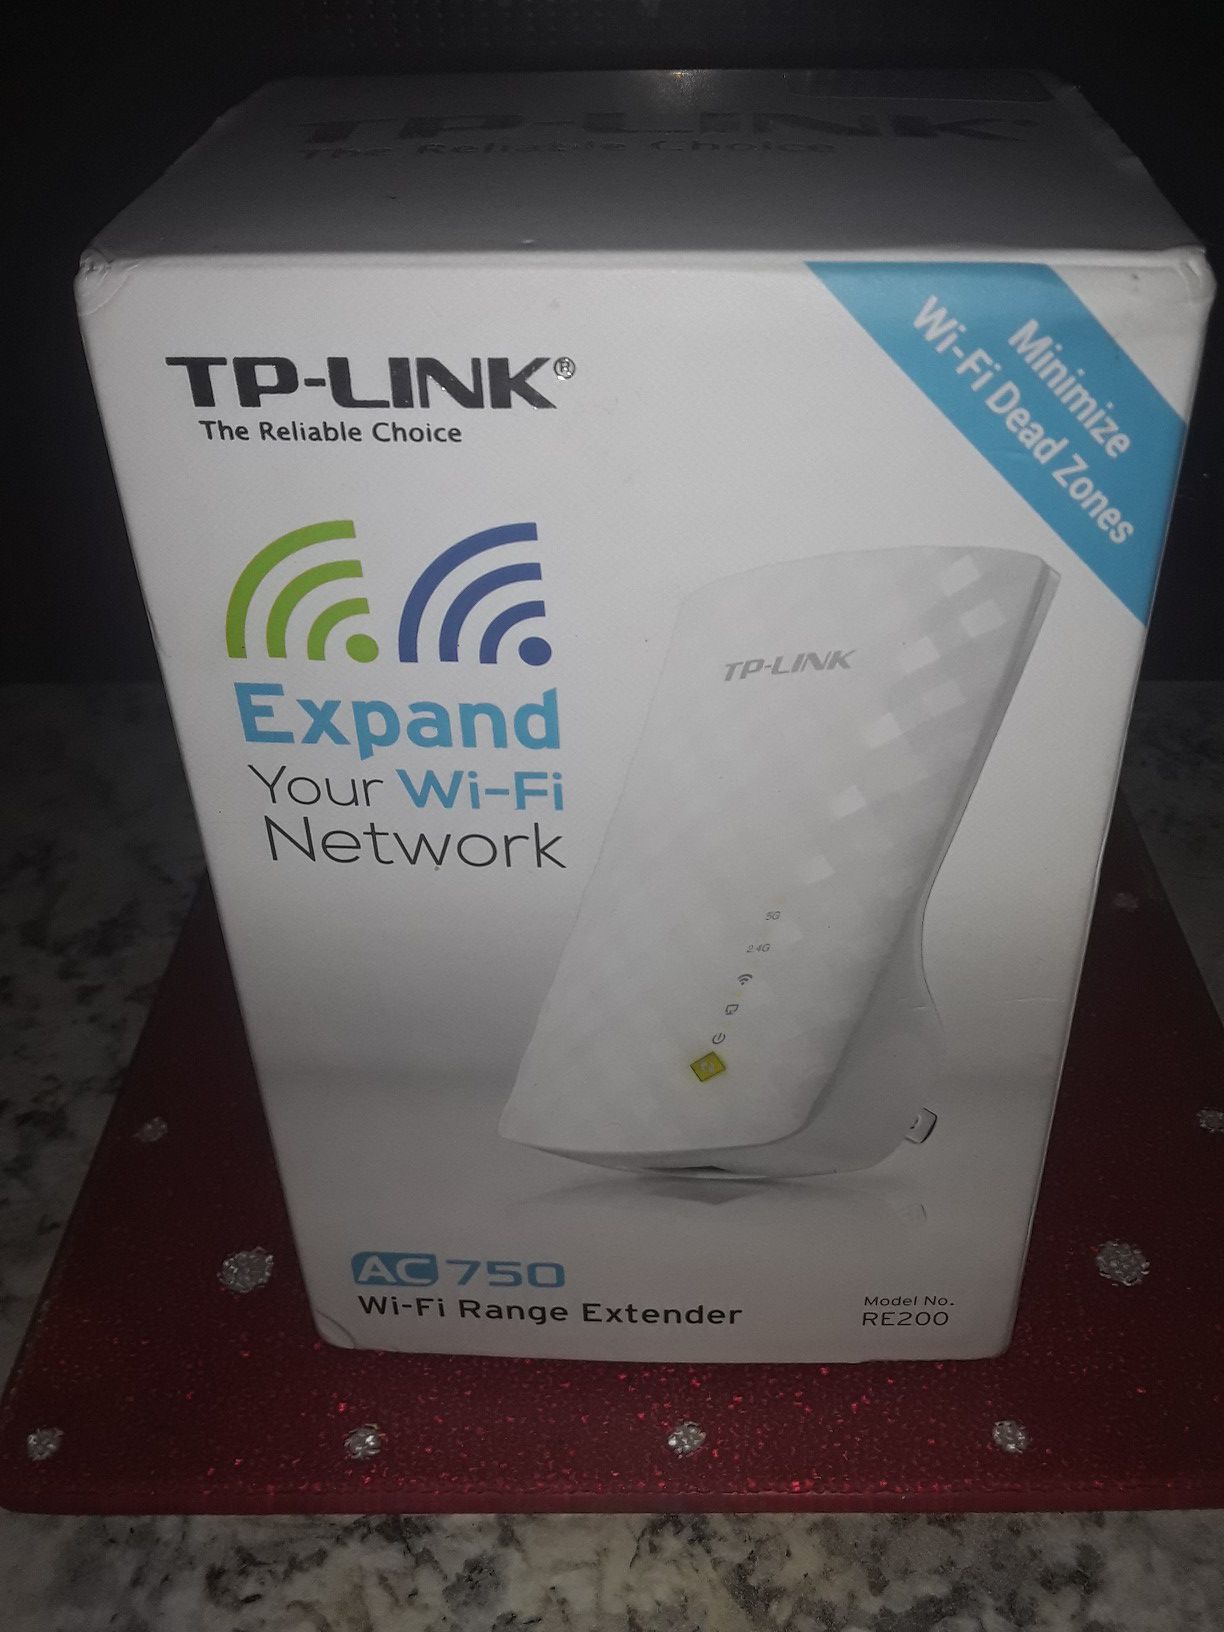 Expand your WI-FI NETWORK